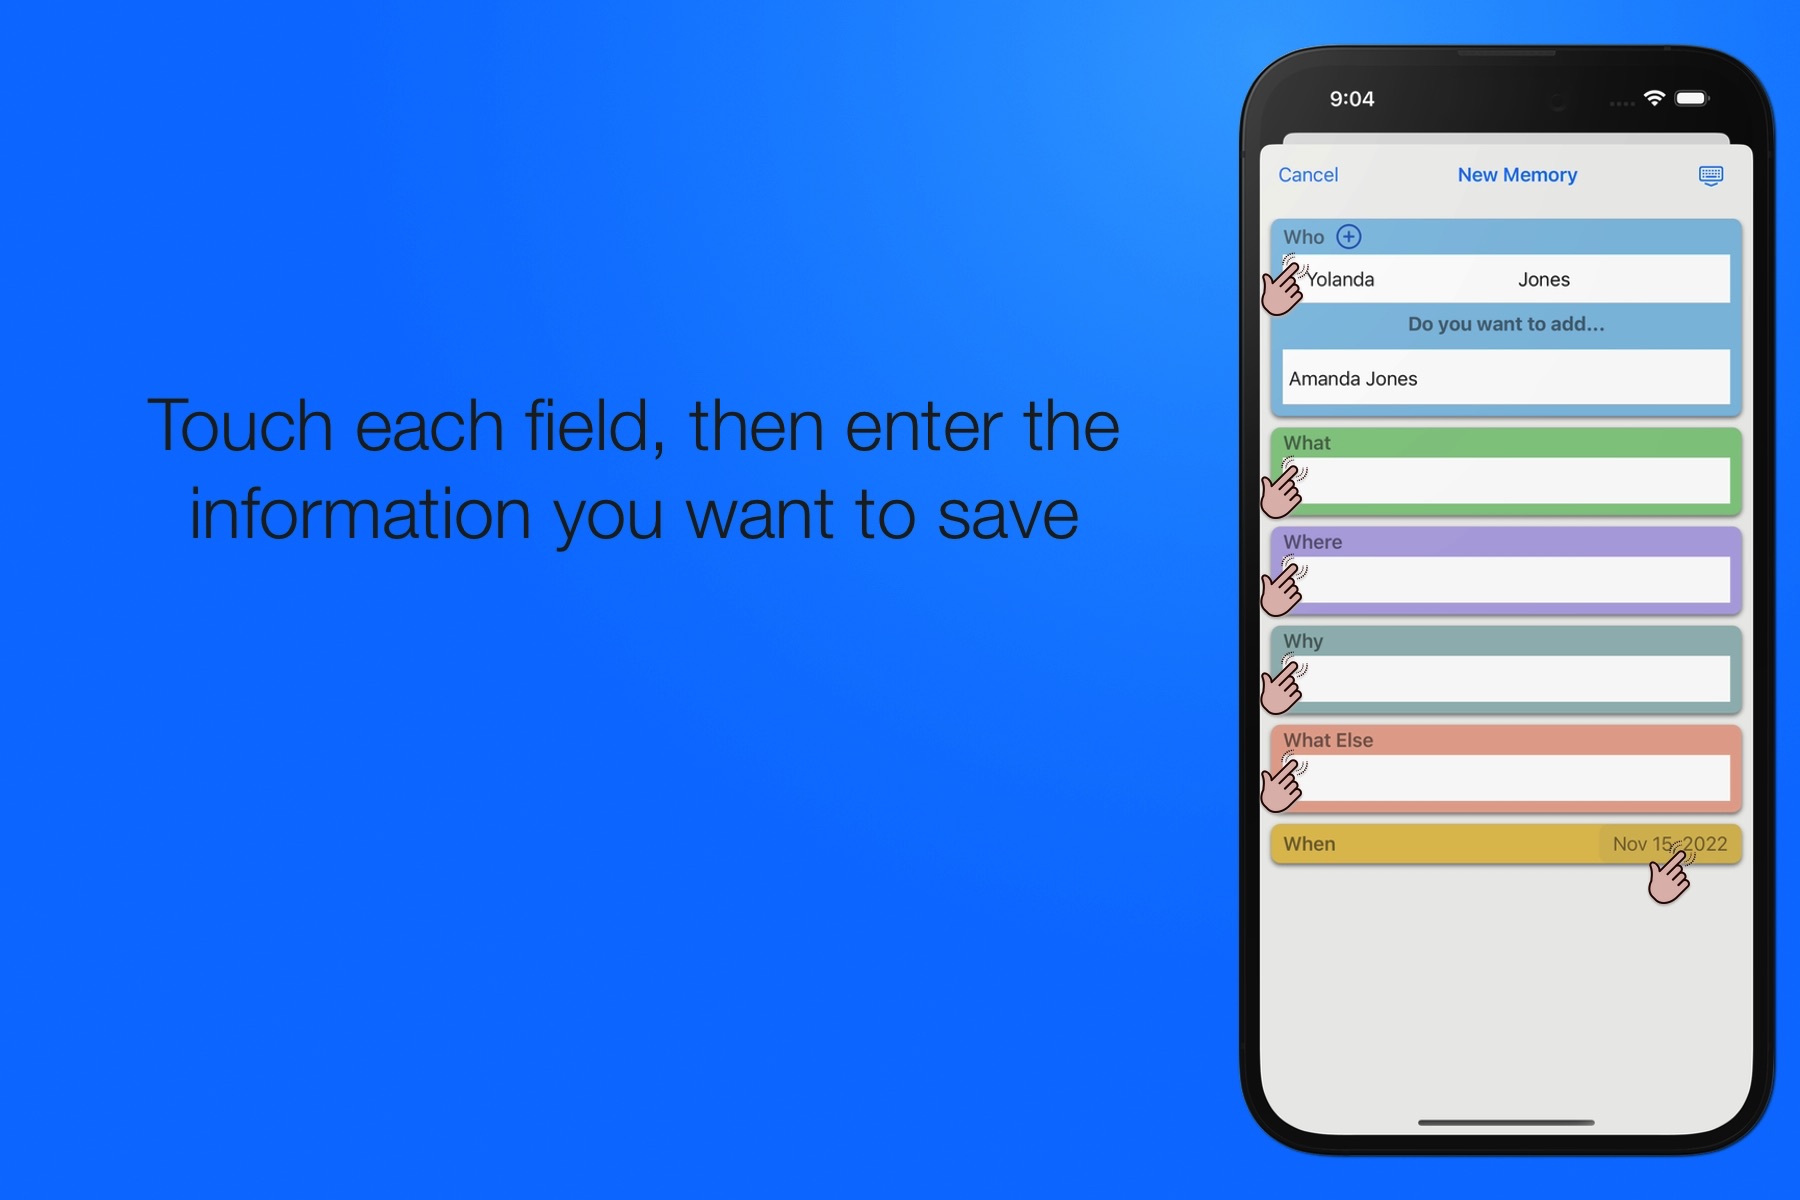 Touch each field, then enter the information you want to save